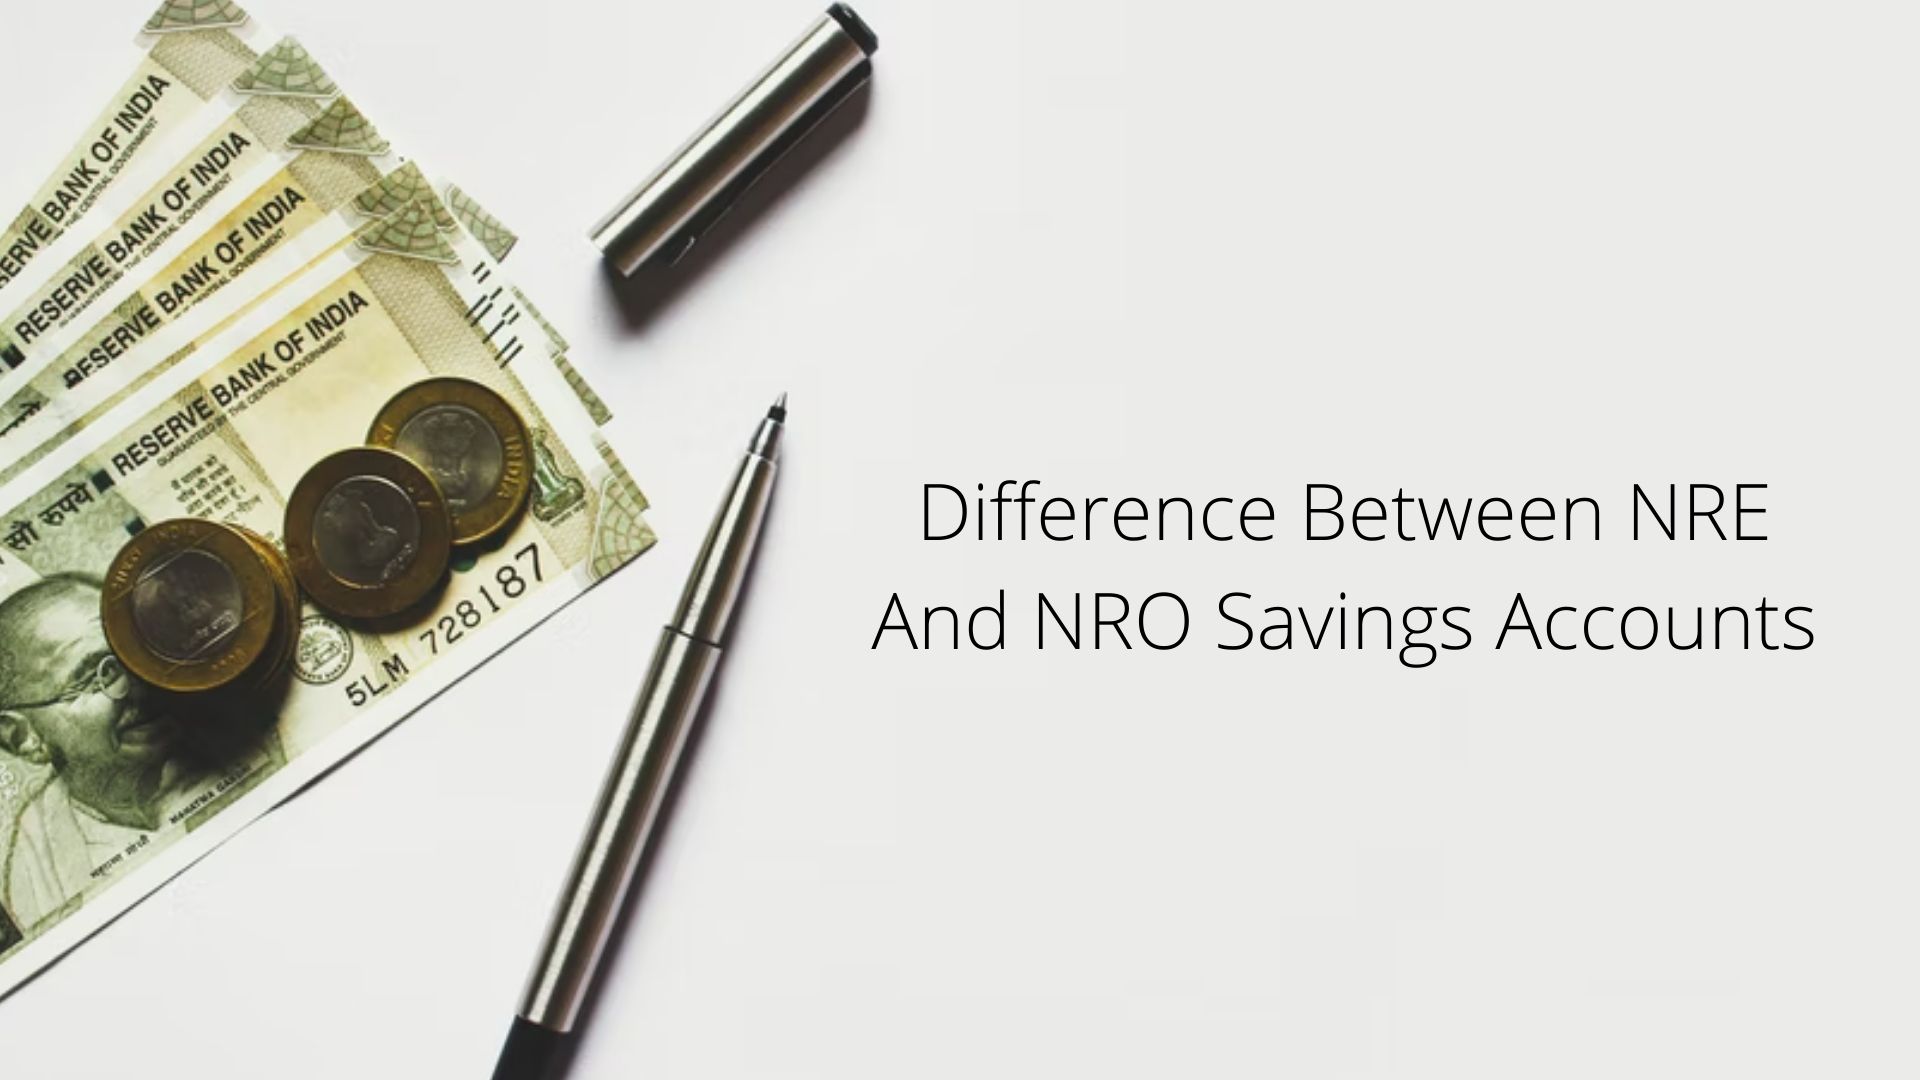 Difference Between NRE And NRO Savings Accounts